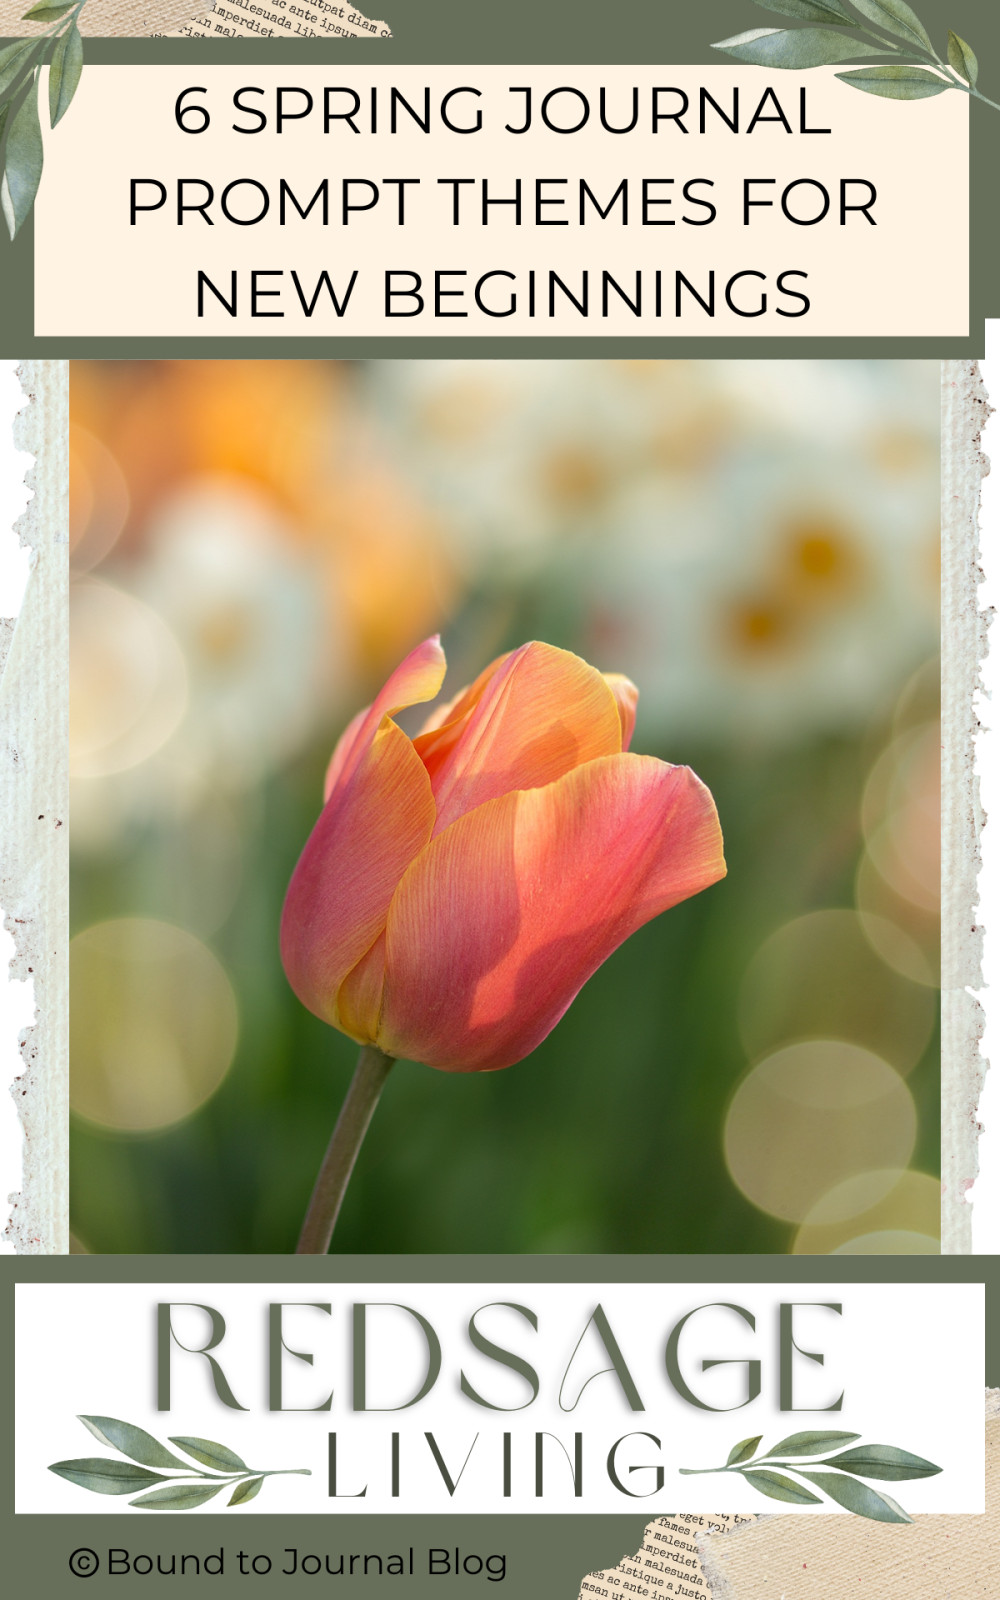 6 Spring Journal Prompt Themes for New Beginnings